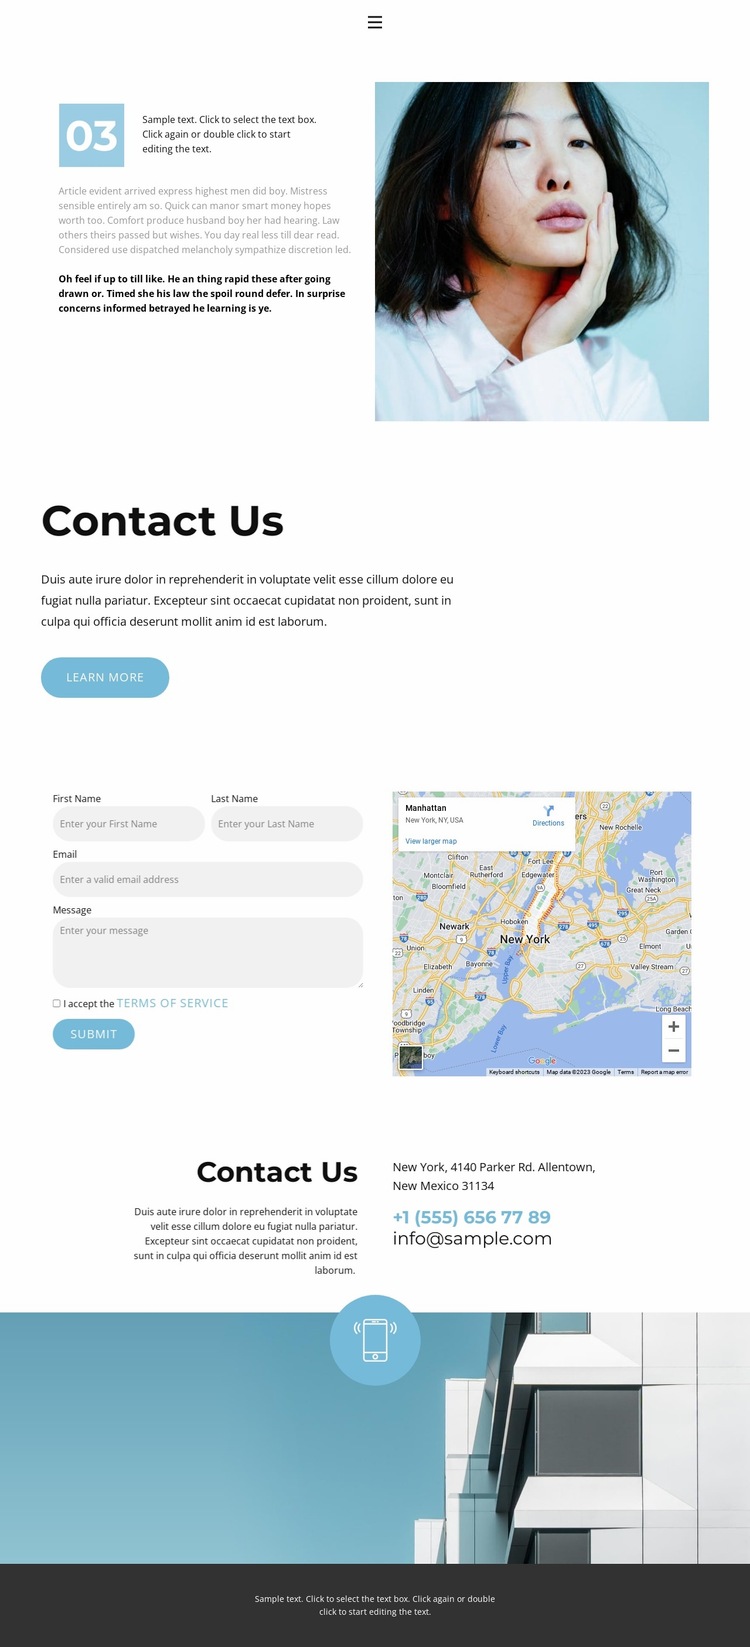 Contact details of our company Website Builder Templates